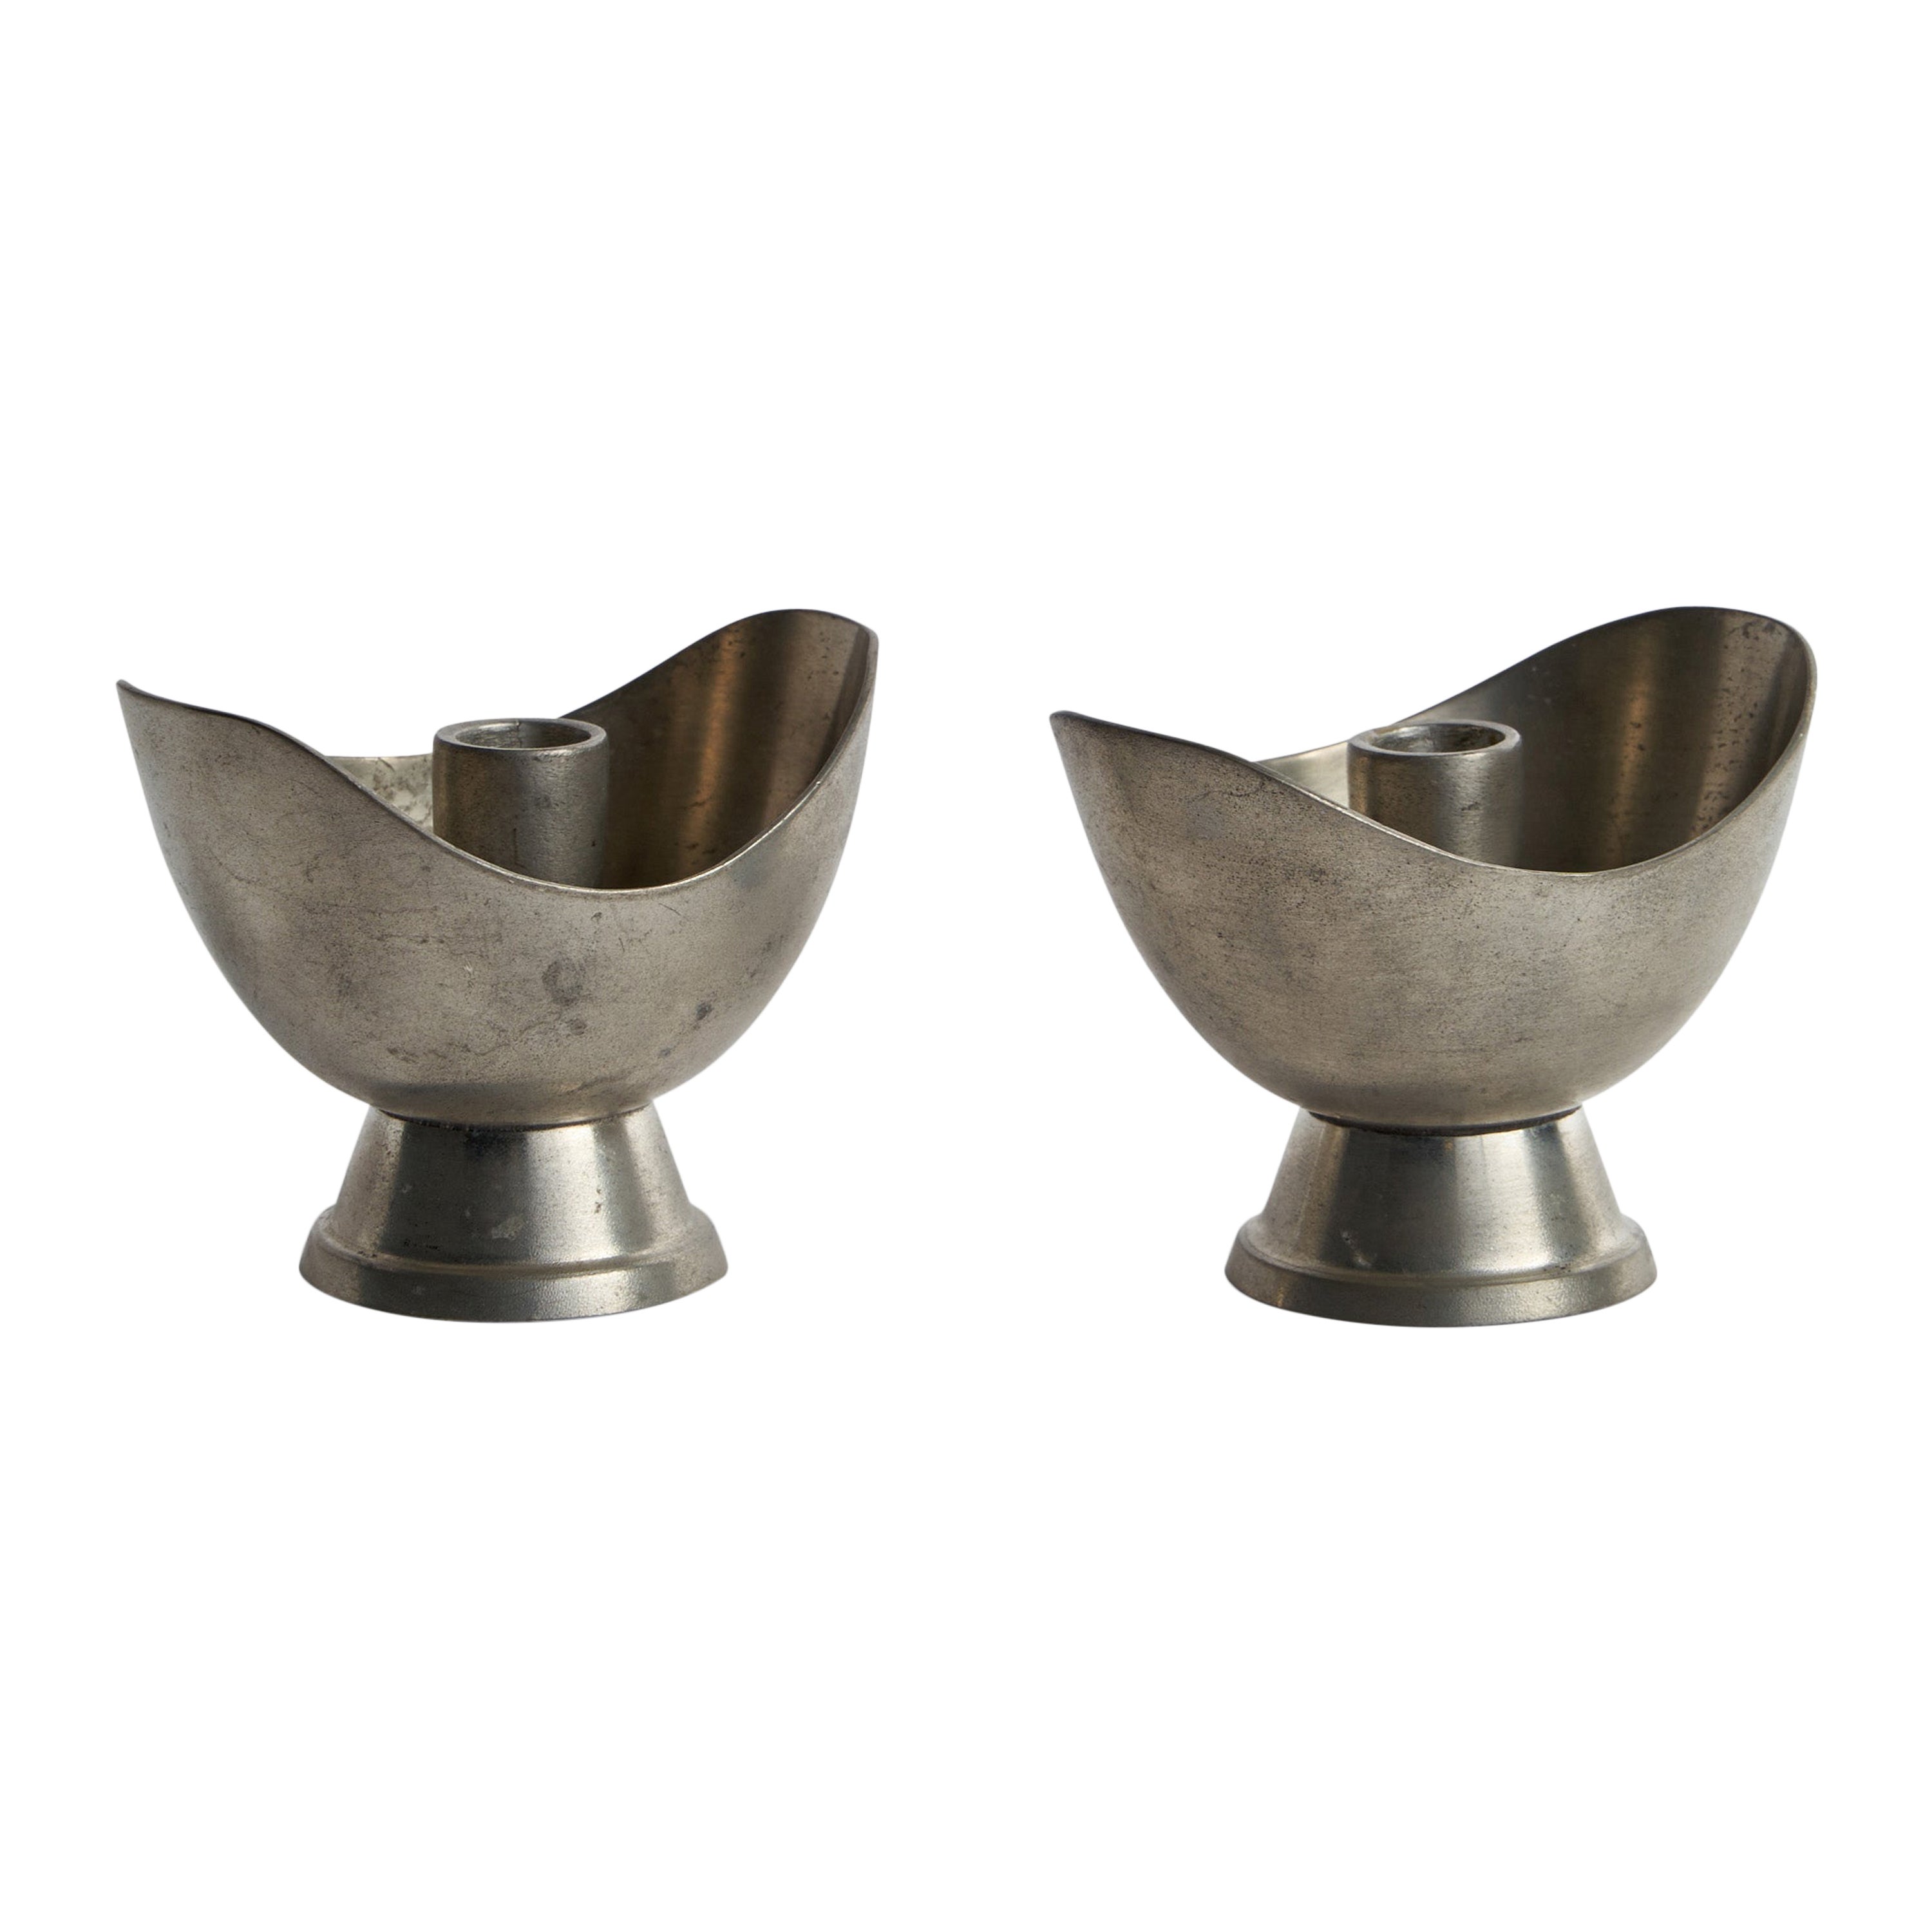 GAB, Small Candlesticks, Pewter, Sweden, 1930s